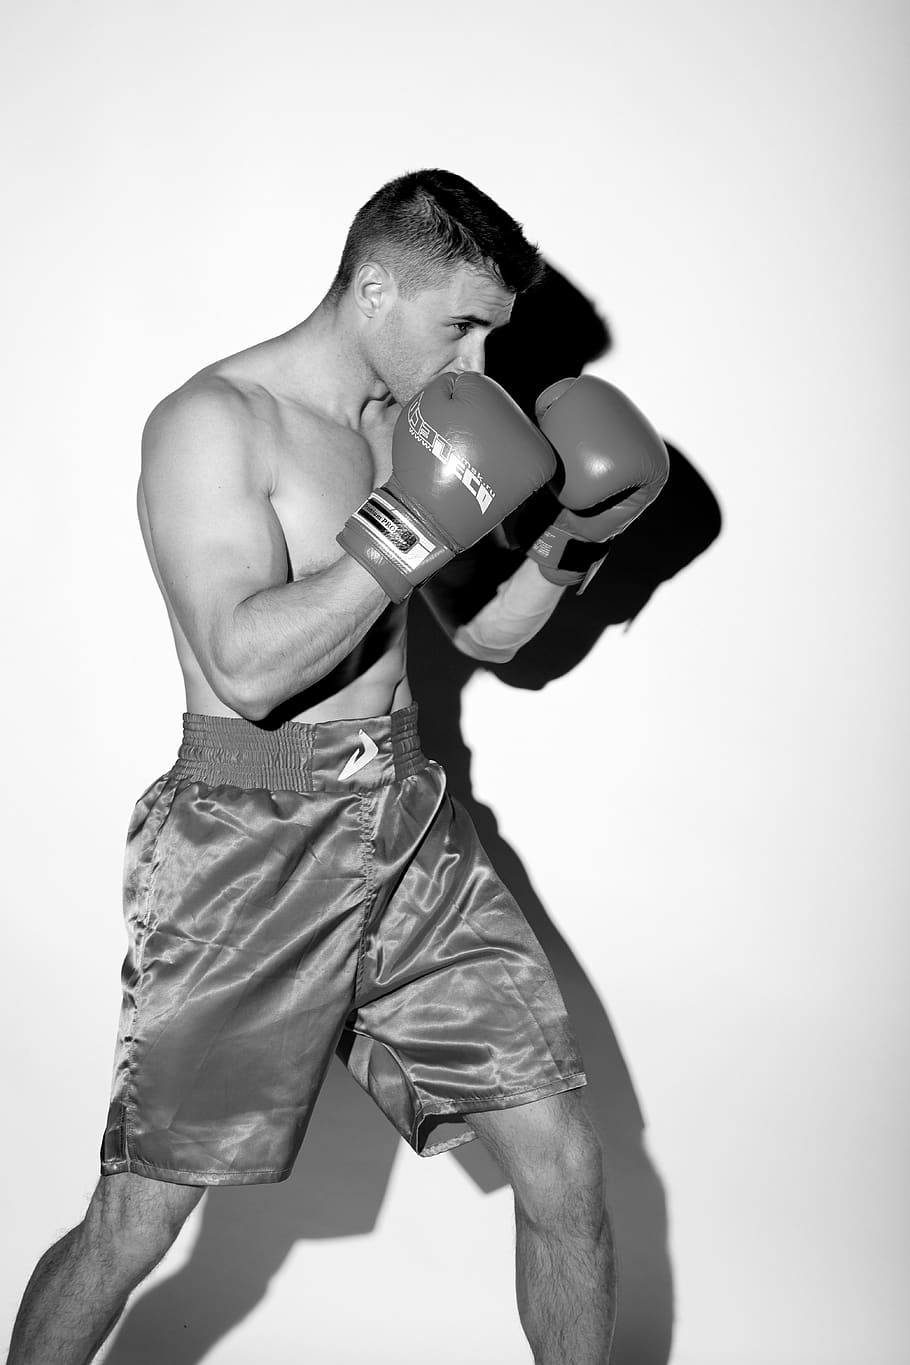 boxing, sport, model, boxer, kickboxing, athlete, fitness, young men, one person, men